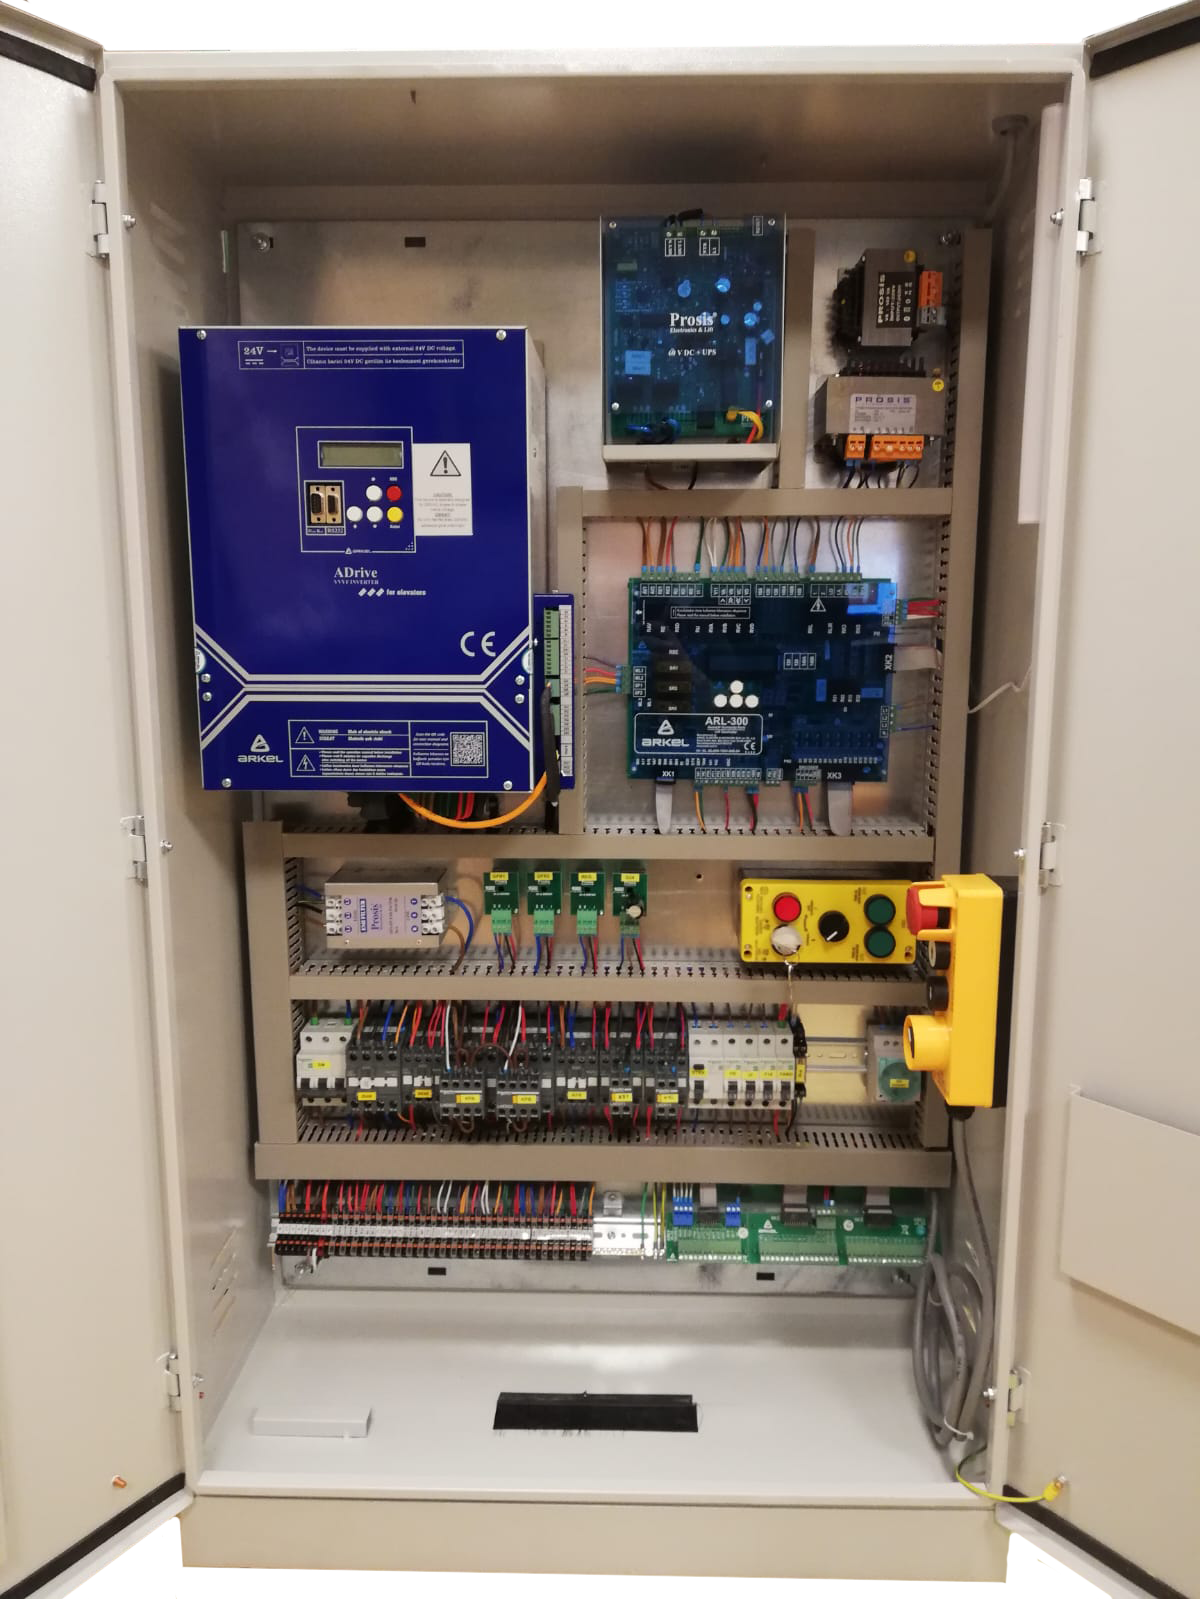 11 kW ADRIVE + ARL300 GEARLESS-SYNCHRONOUS-MR-A3-BATTERY RESCUE CONTROL PANEL